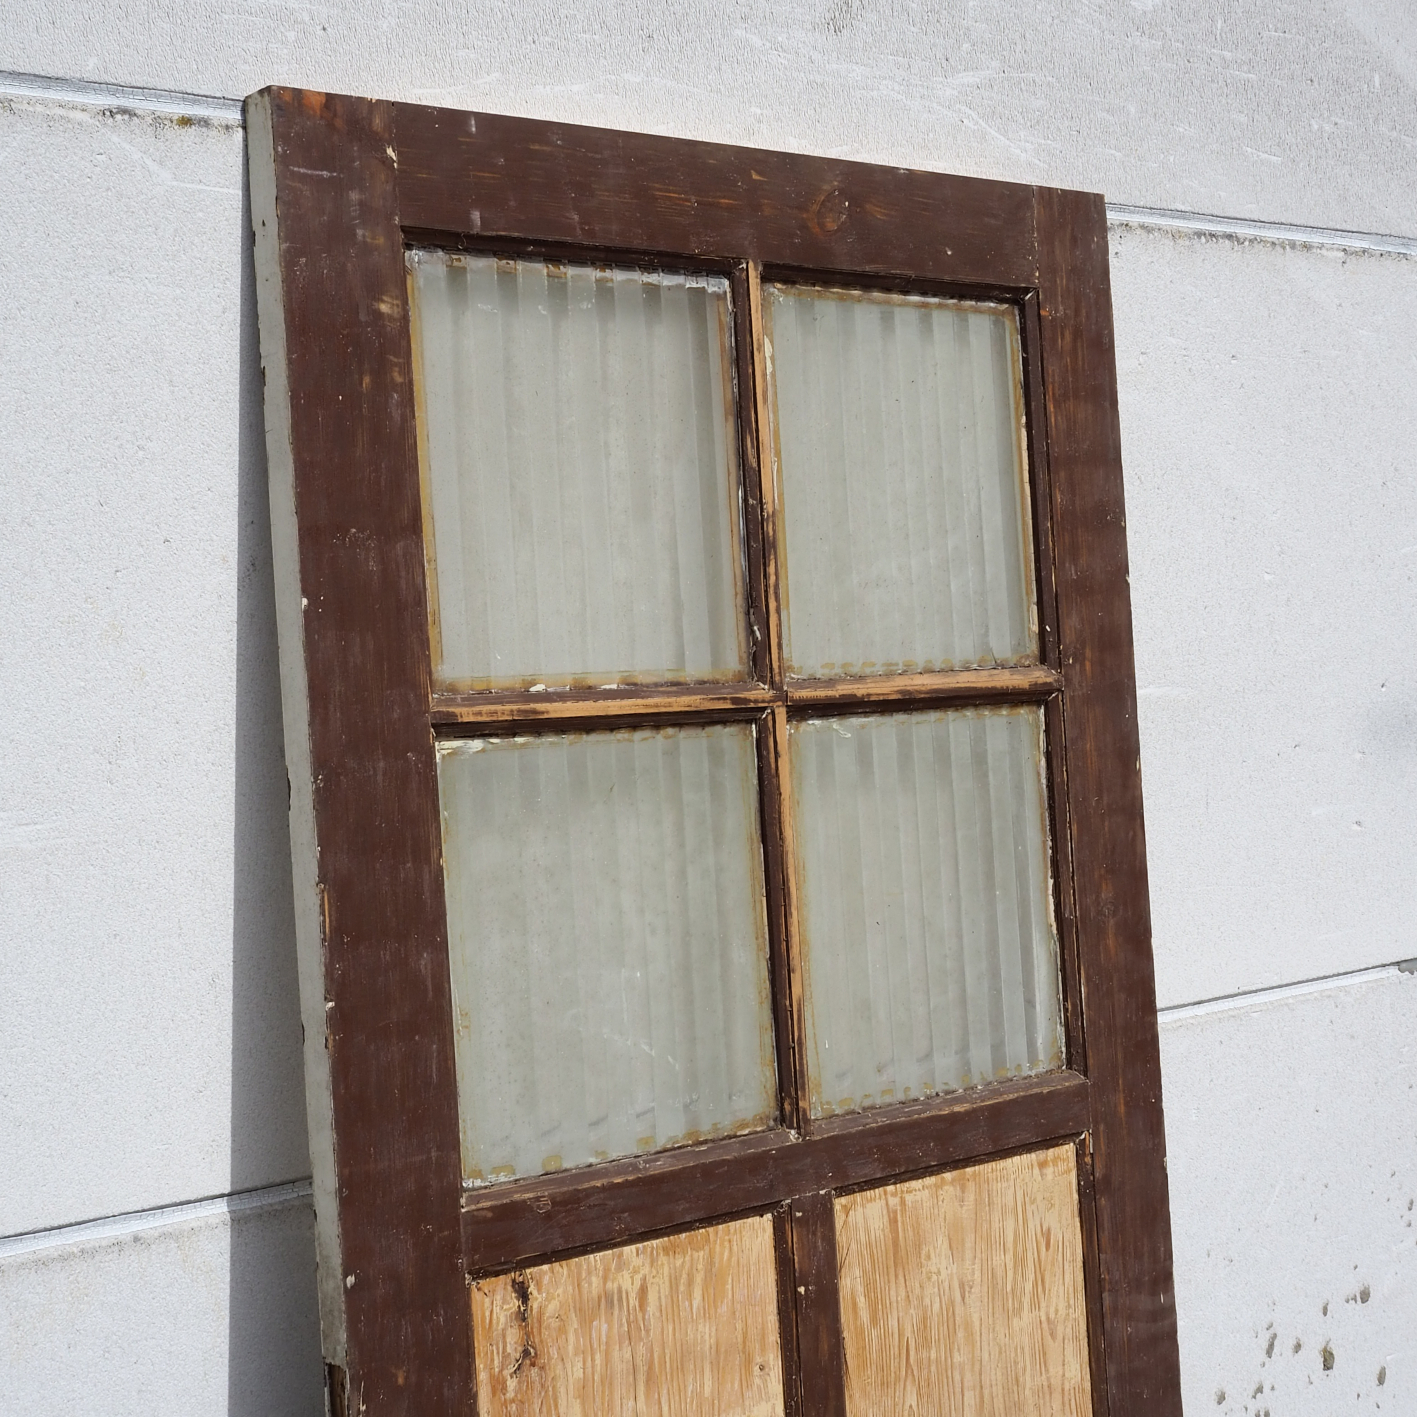 Wooden door with glass panels (H. 201.5 x W. 81 cm) – Left/Right